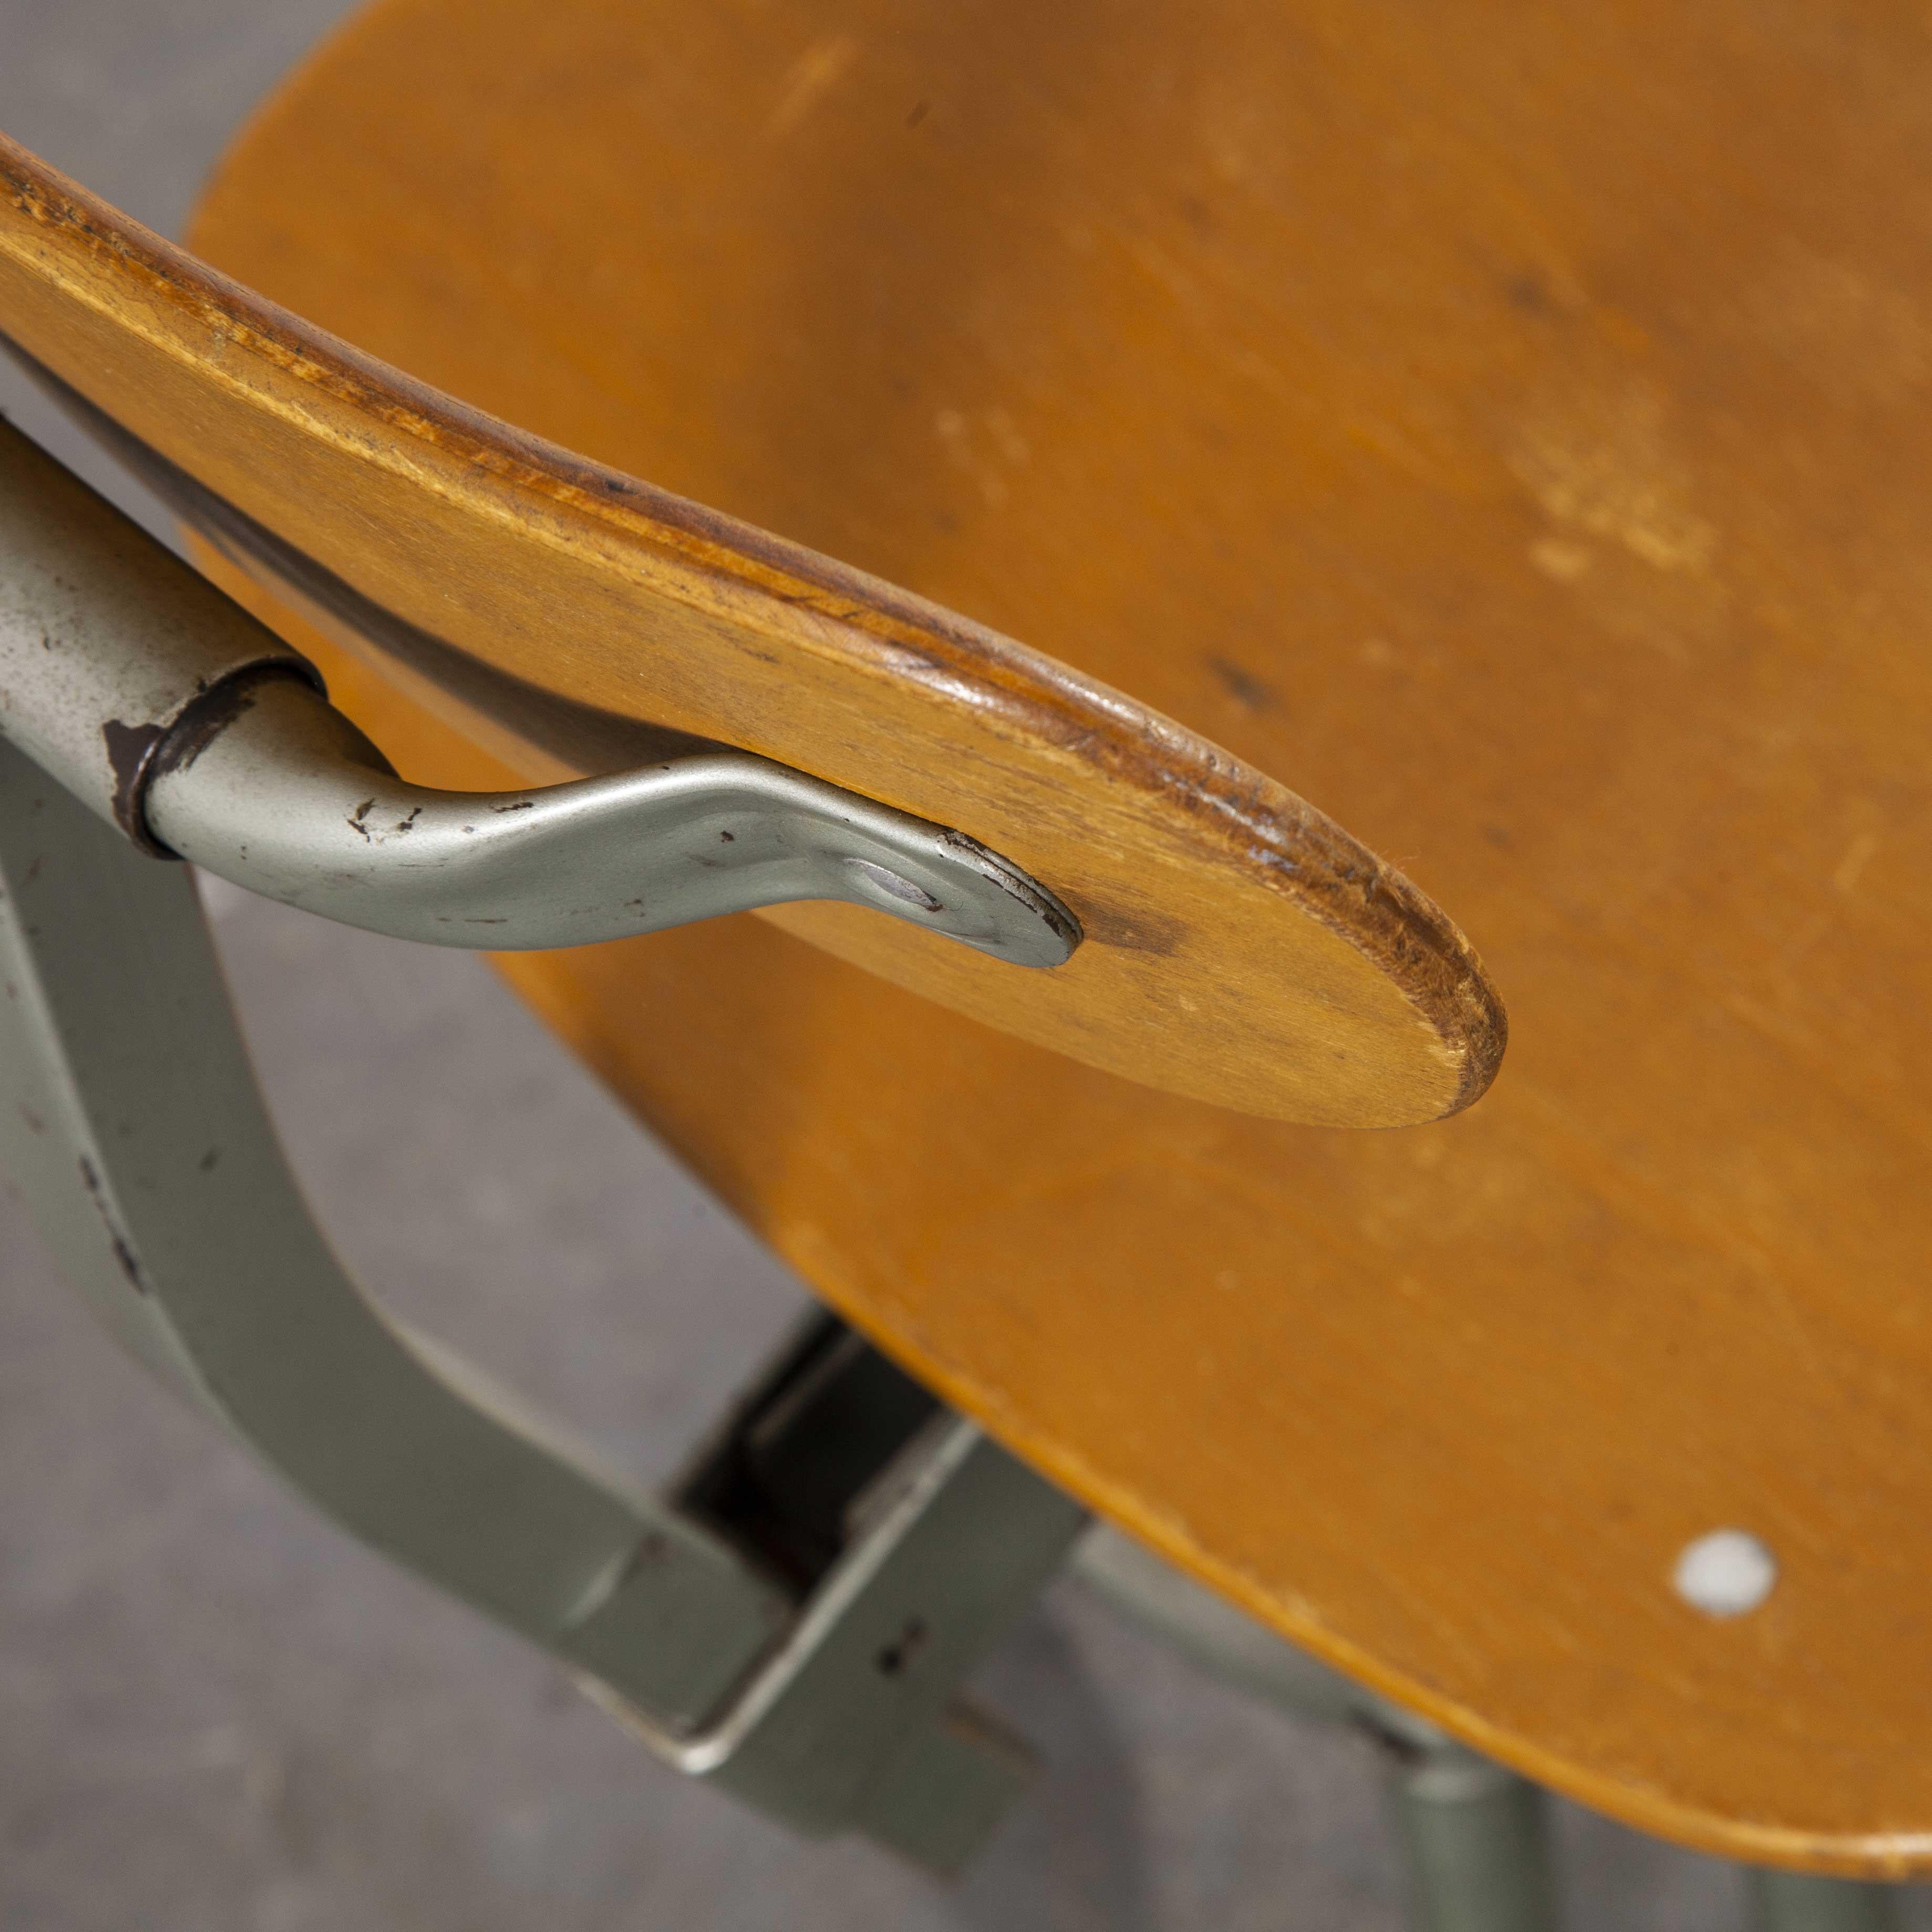 1960s original French Bienaise swiveling atelier - desk chair. The classic French industrial chair designed and made in France by the Nelson Brothers.
Back rest height dimensions are as photographed. Overall height maximum 90cm, height minimum